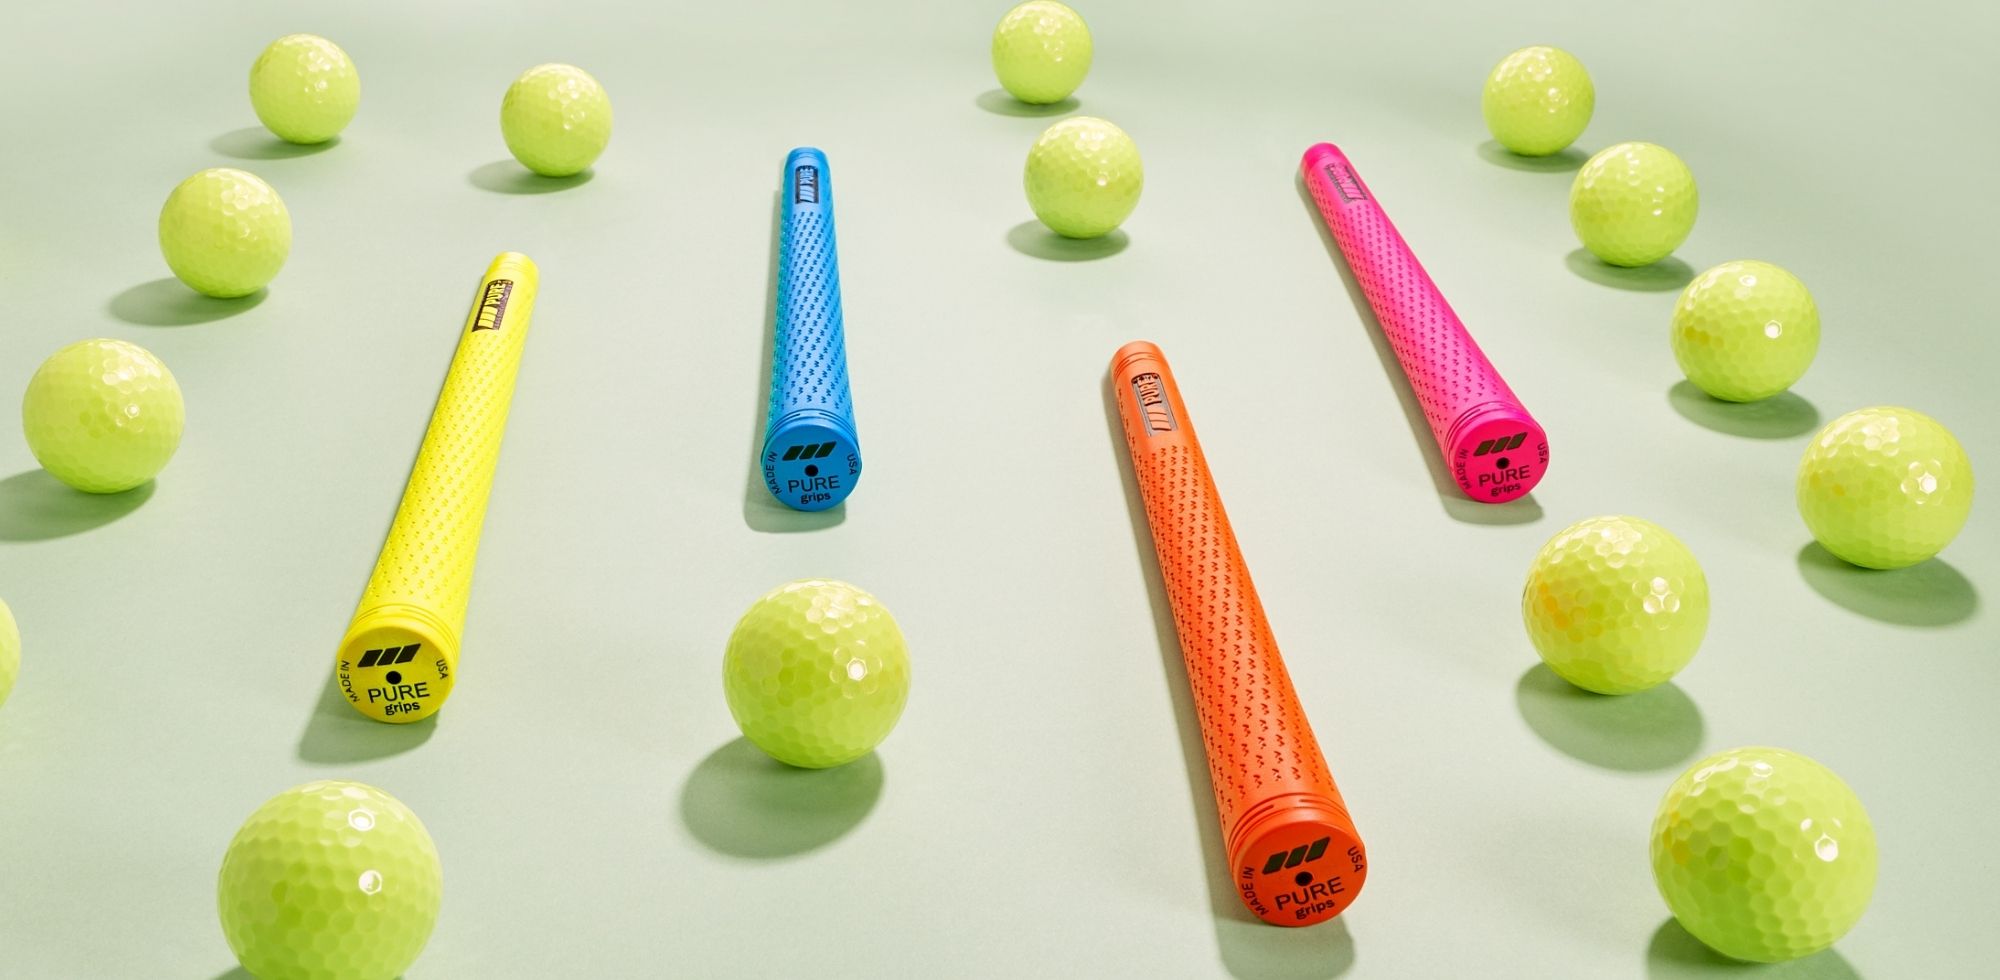 PURE Grips PURE Pro Neon Color Golf Grips and Neon Yellow Golf Balls